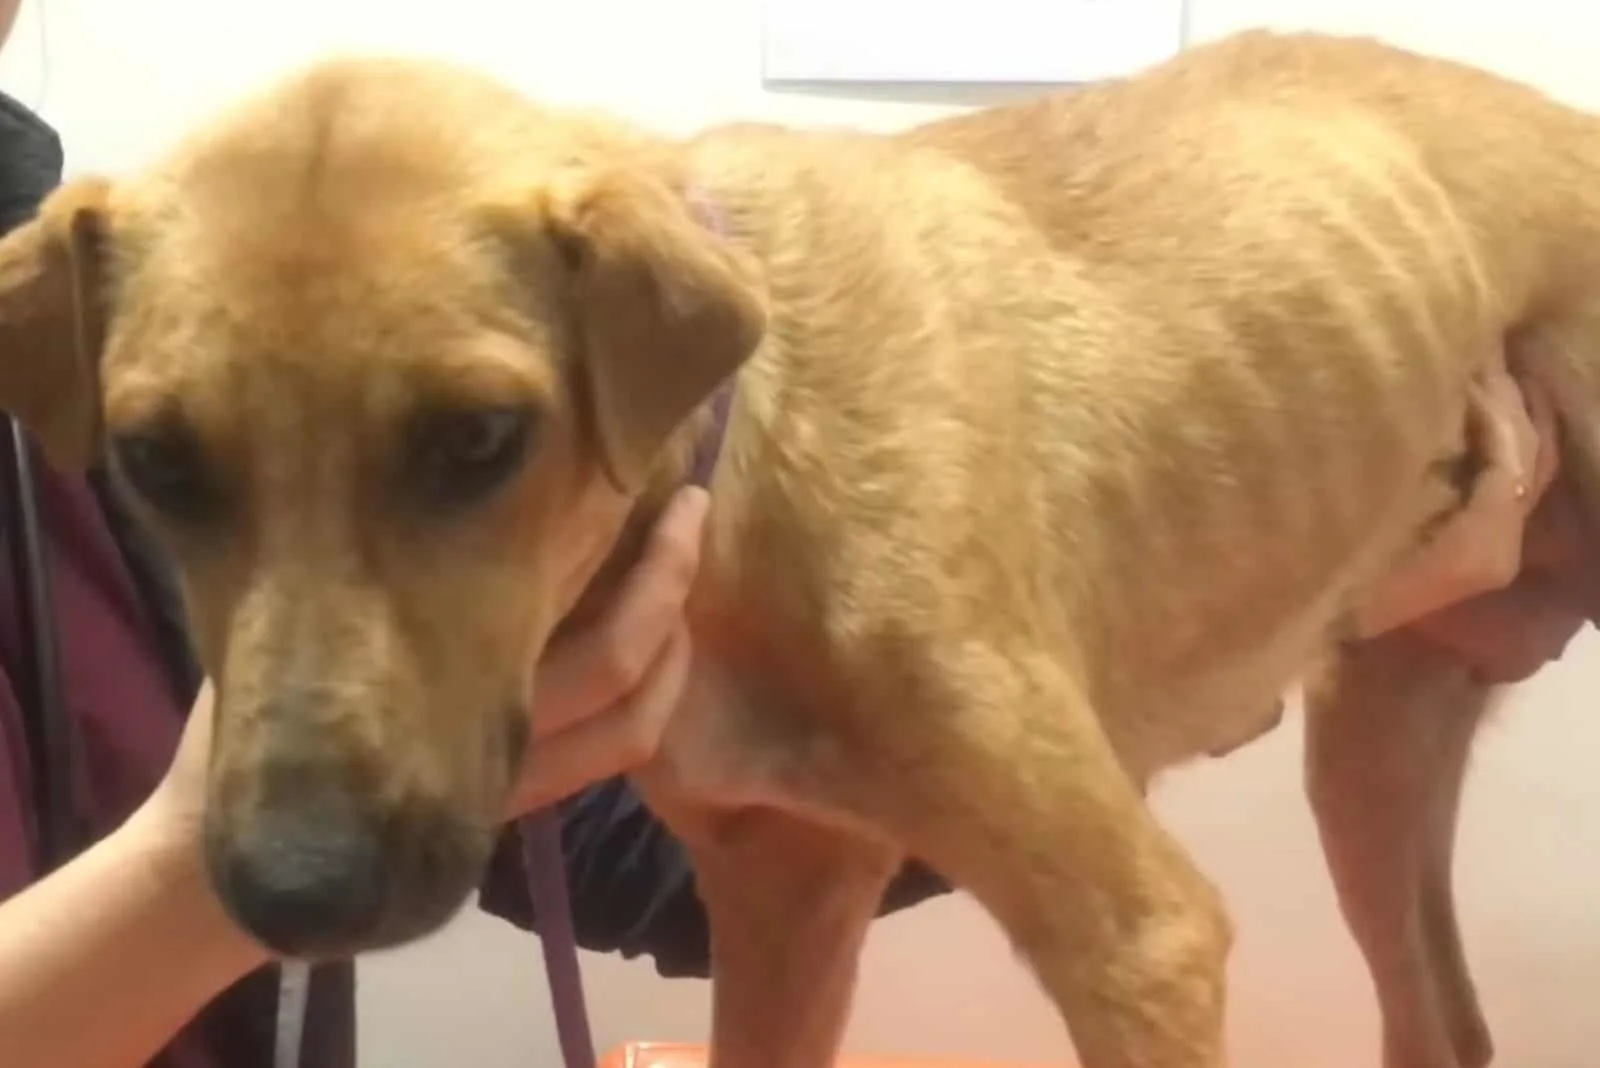 Ginger the shelter dog looking very malnourished